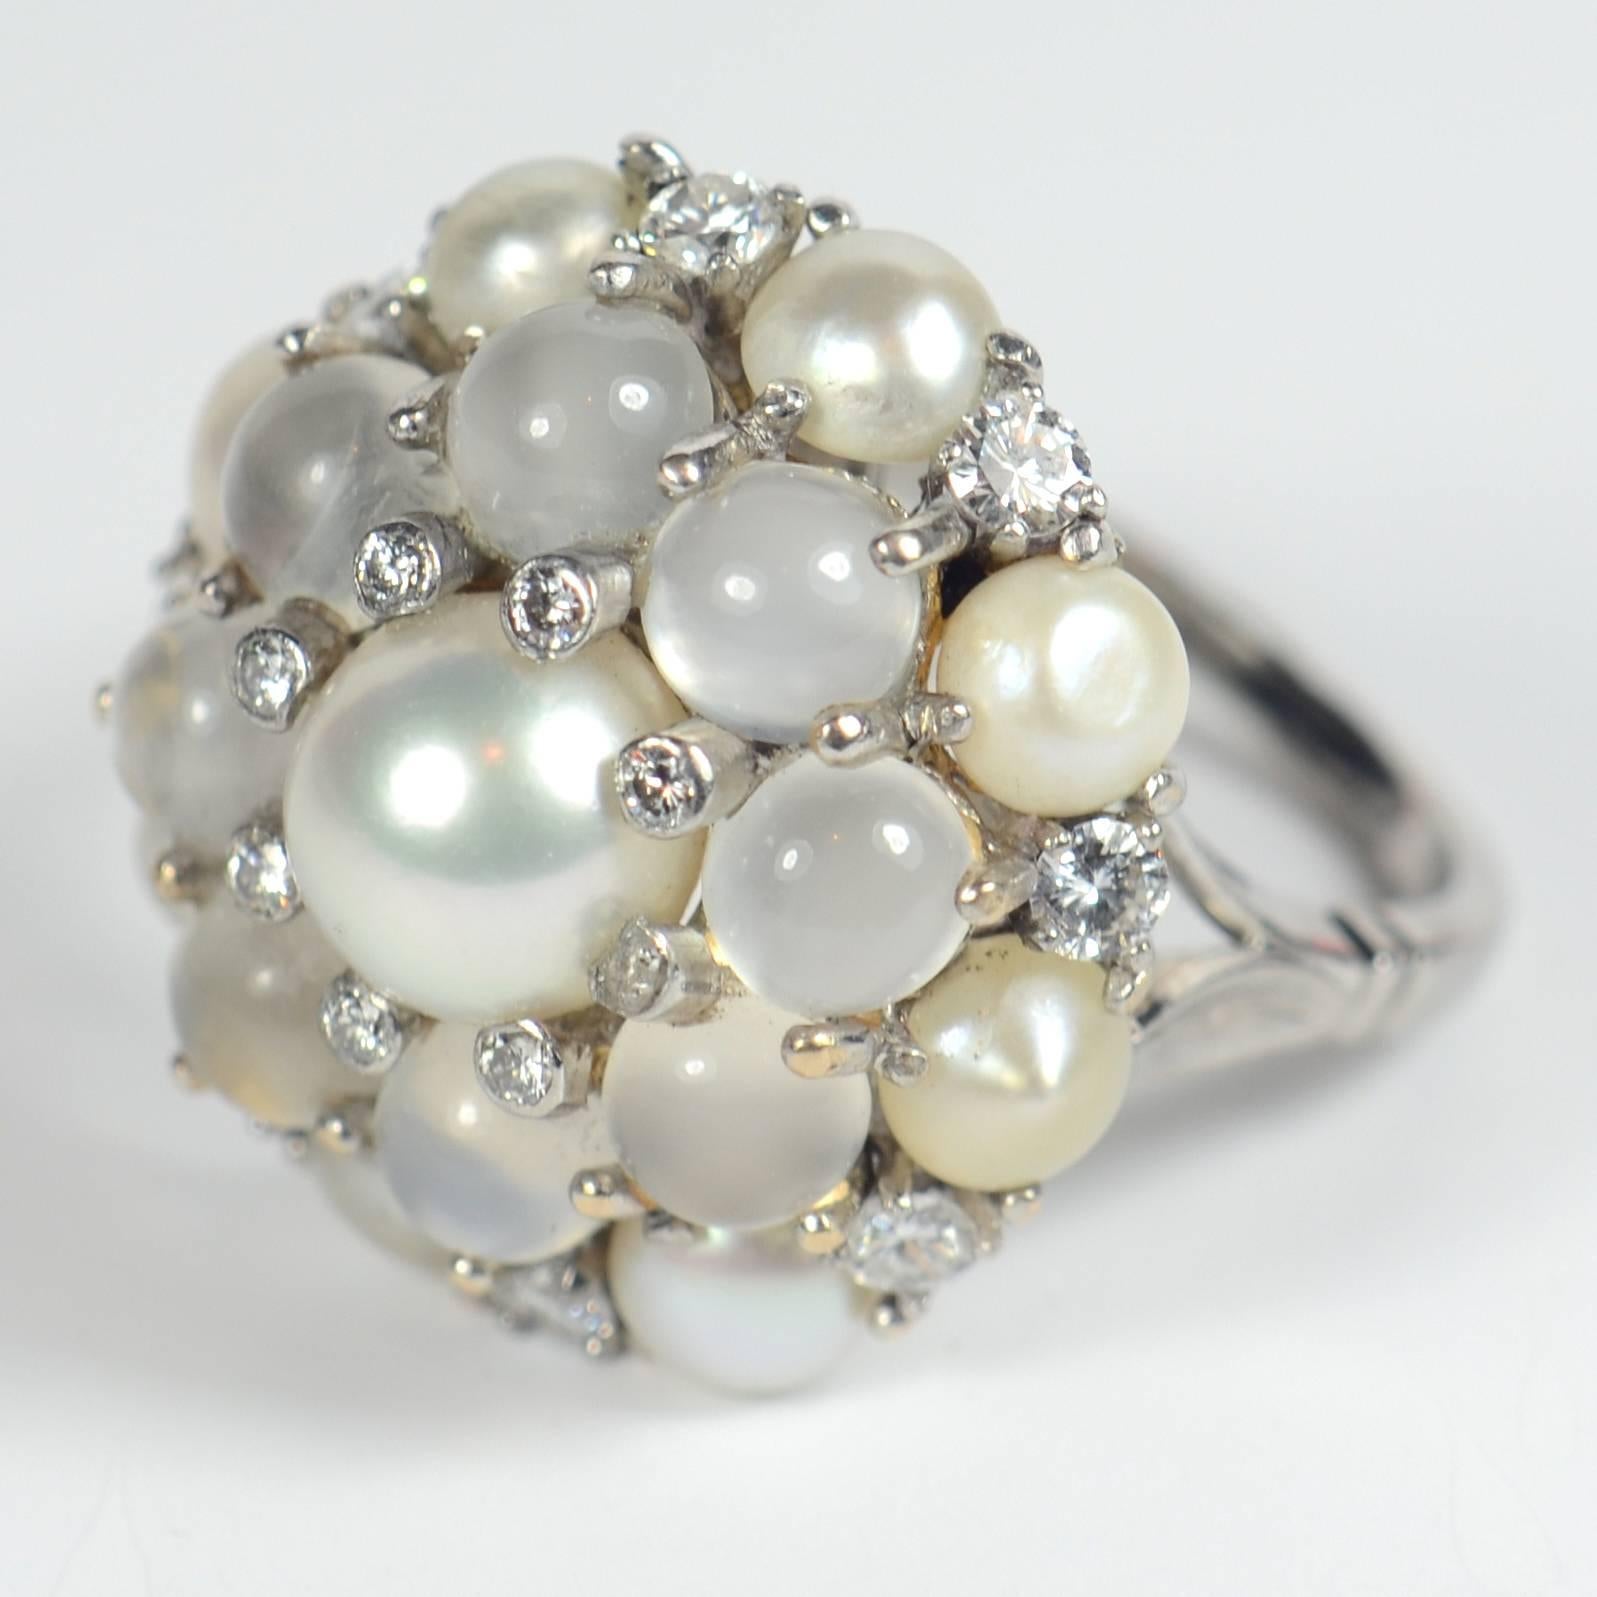 A refined white on white colour scheme gives this striking moonstone and pearl bombe ring an elegant appearance – just the thing for cocktail hour!  

The ring is marked 18ct for 18 carat white gold, and is set with 9 pearls, 8 cat’s eye moonstones